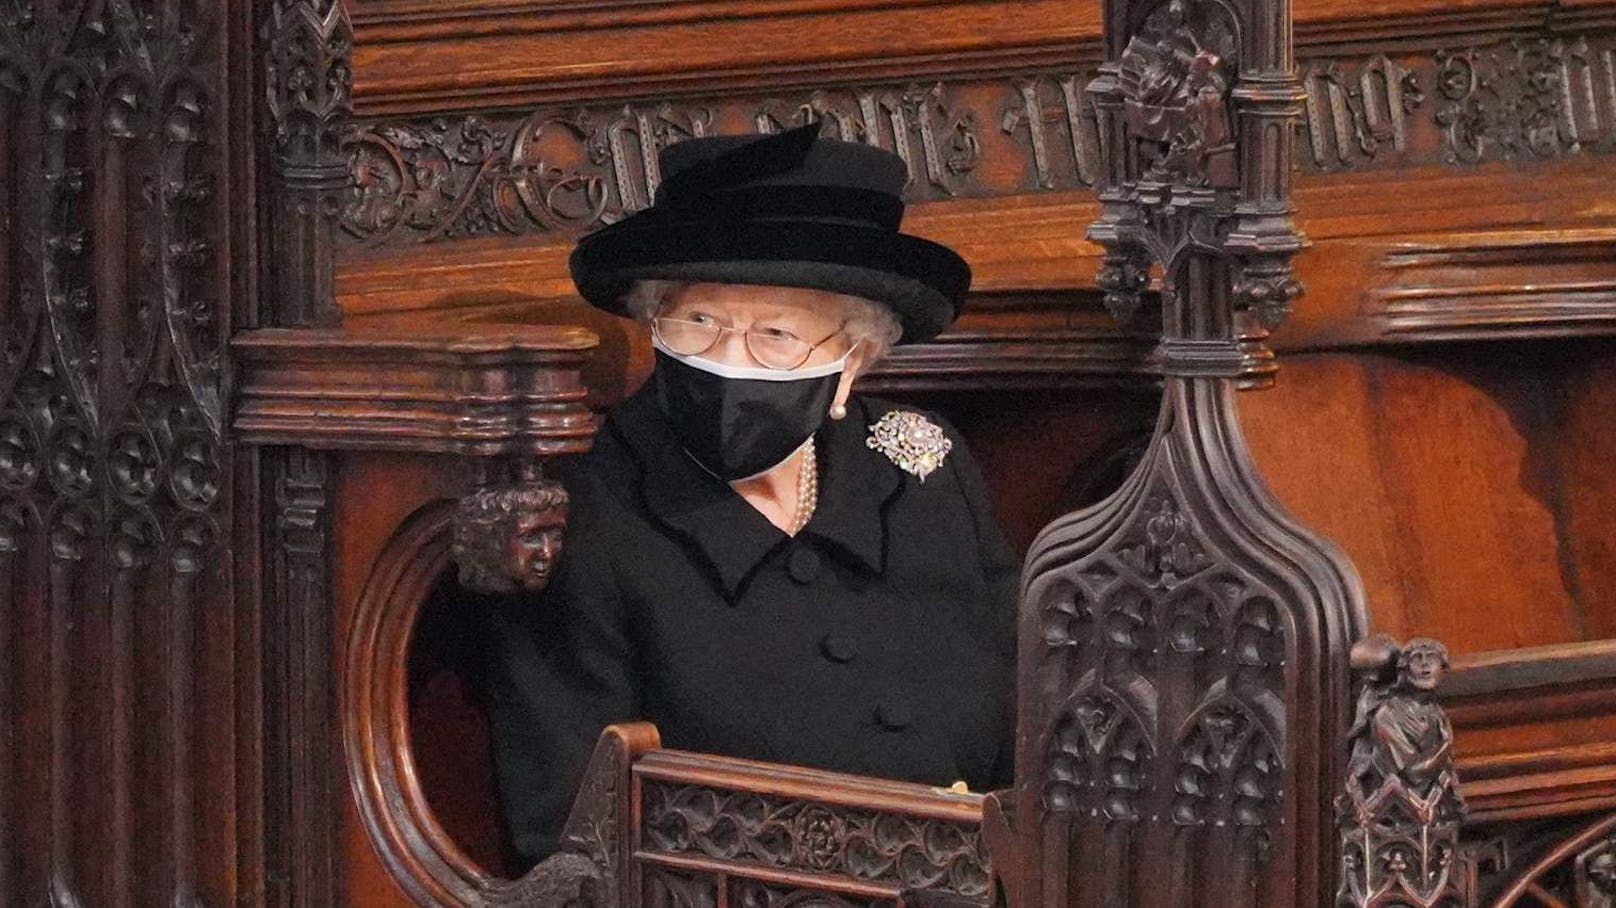 Download von www.picturedesk.com am 19.04.2021 (15:42). 
TOPSHOT - Queen Elizabeth II takes her seat for the funeral service of Britain's Prince Philip, Duke of Edinburgh inside St George's Chapel in Windsor Castle in Windsor, west of London, on April 17, 2021. - Philip, who was married to Queen Elizabeth II for 73 years, died on April 9 aged 99 just weeks after a month-long stay in hospital for treatment to a heart condition and an infection. (Photo by Jonathan Brady / POOL / AFP) - 20210417_PD16444 - Rechteinfo: Rights Managed (RM) Nur für redaktionelle Nutzung! Werbliche Nutzung erfordert Freigabe: bitte schicken Sie uns eine Anfrage.